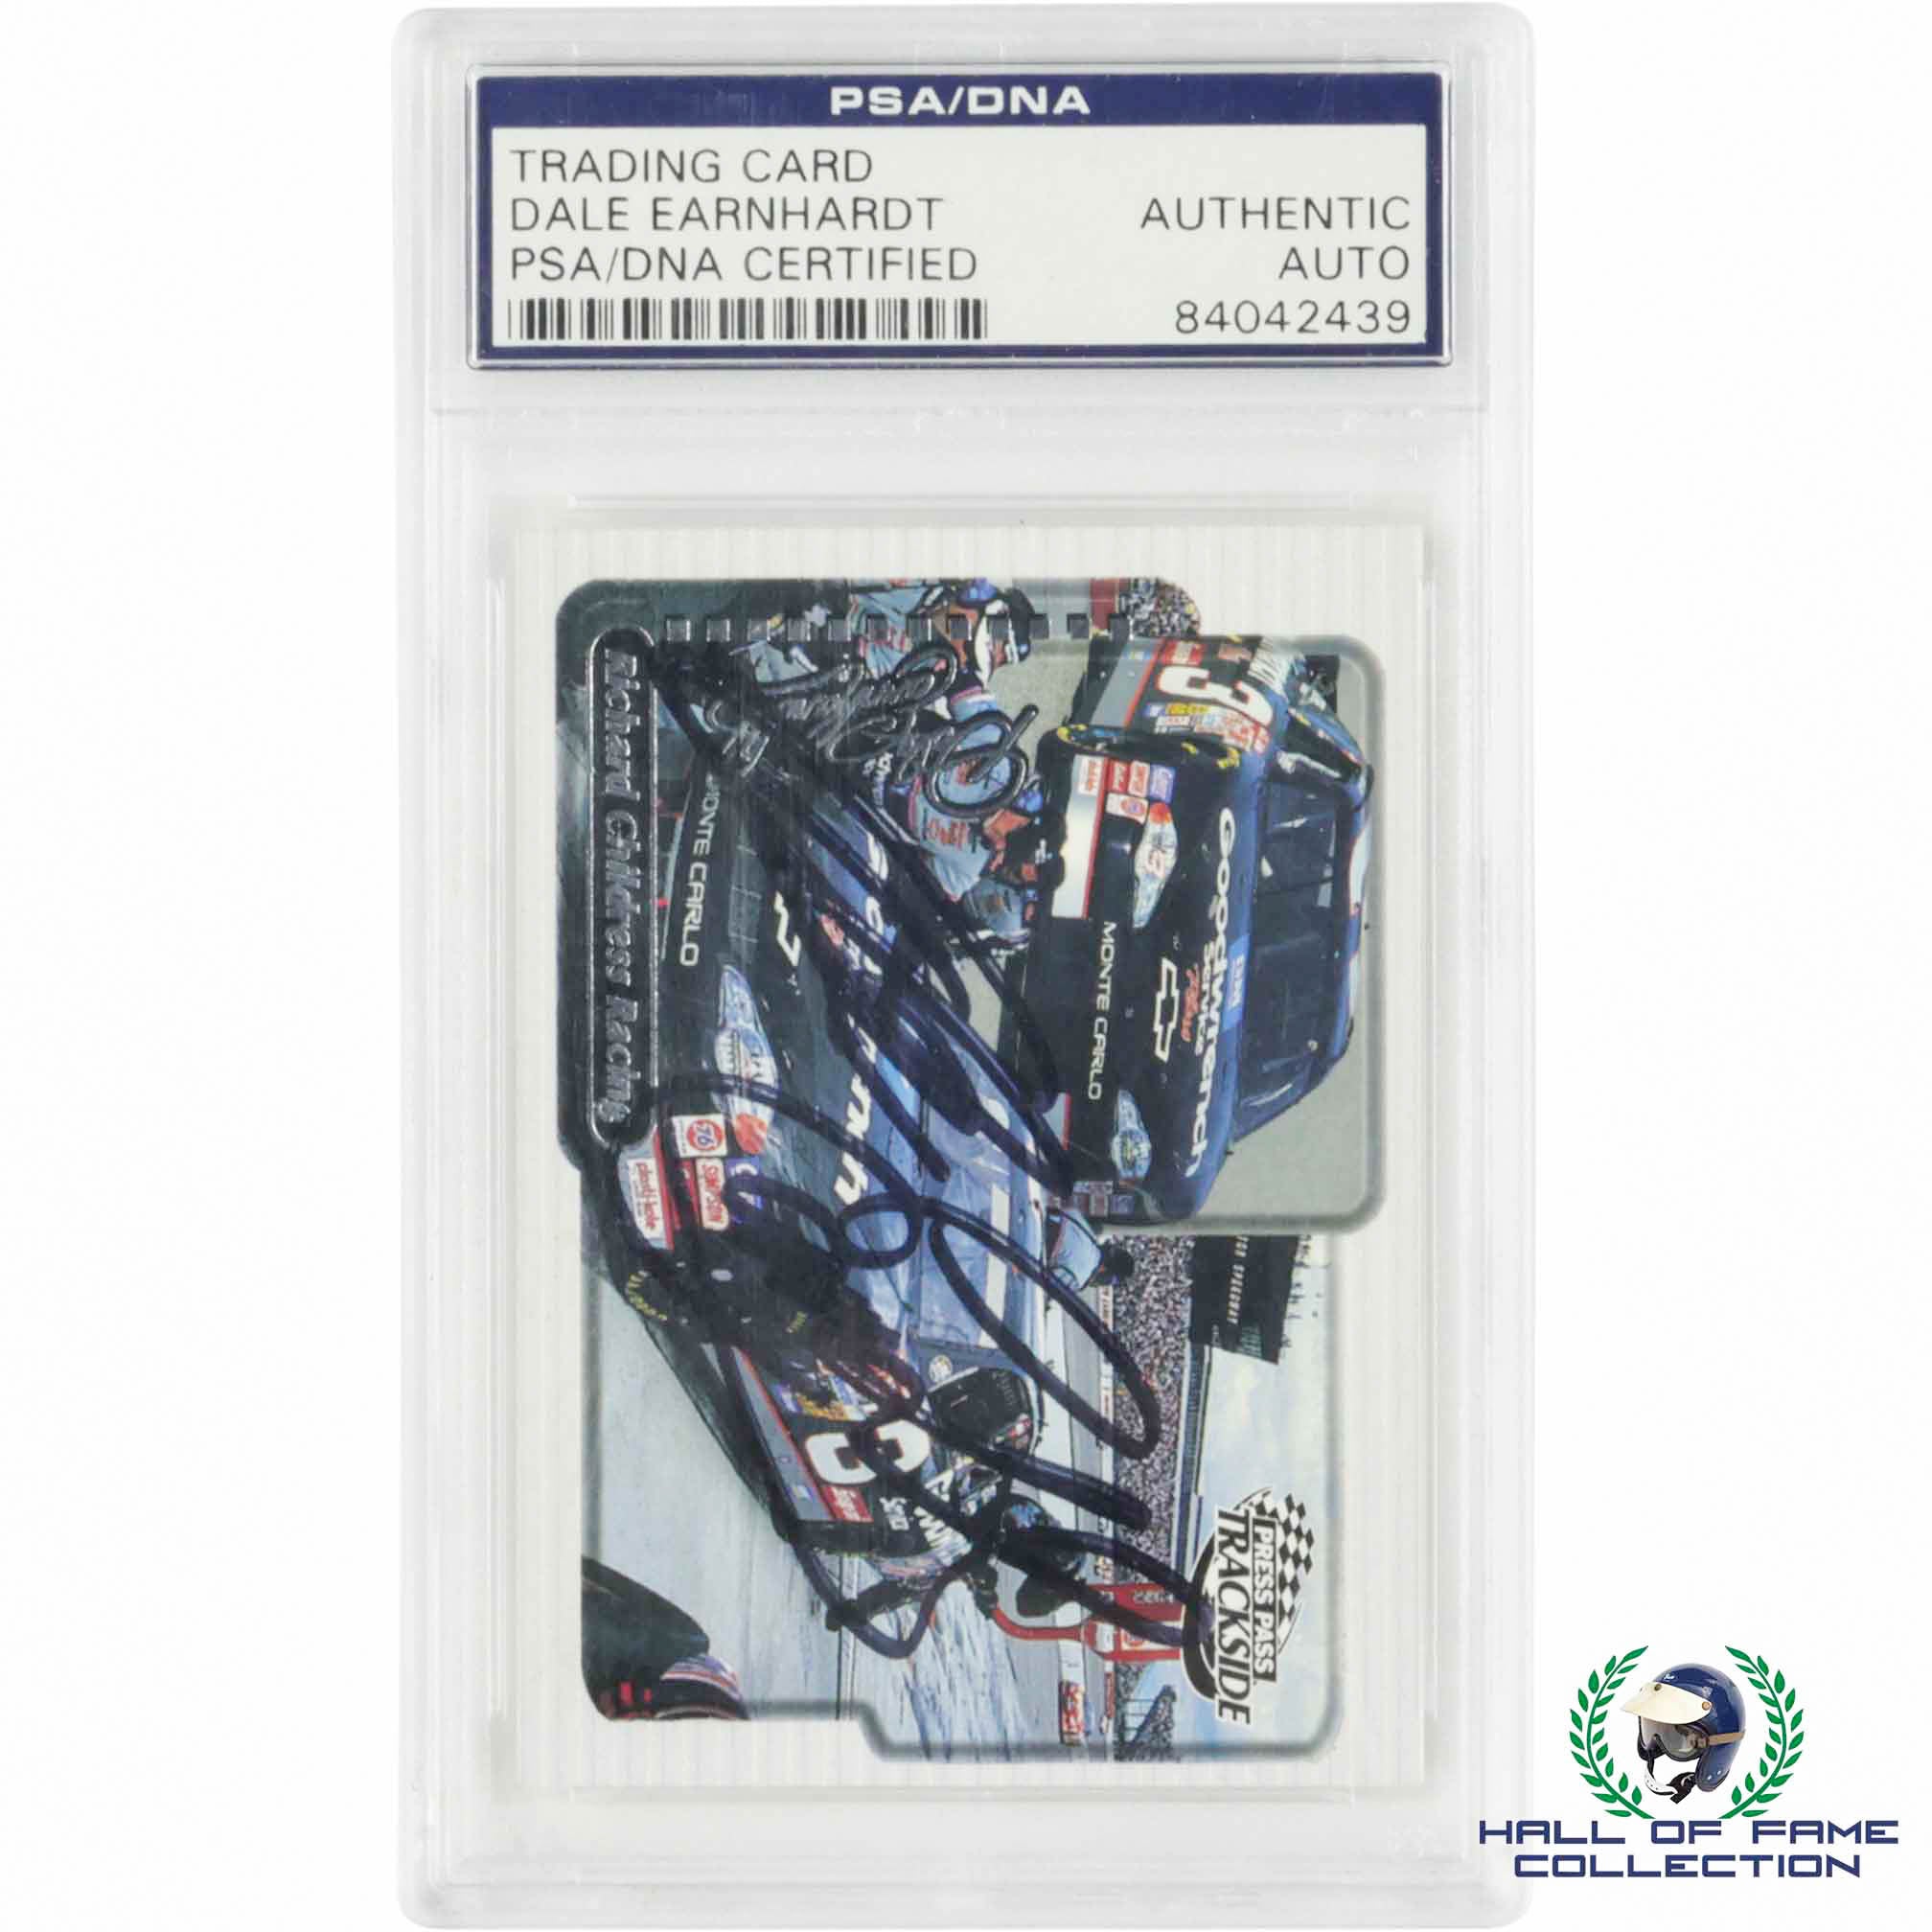 2000 Press Pass Trackside Dale Earnhardt Autographed PSA/DNA Certified